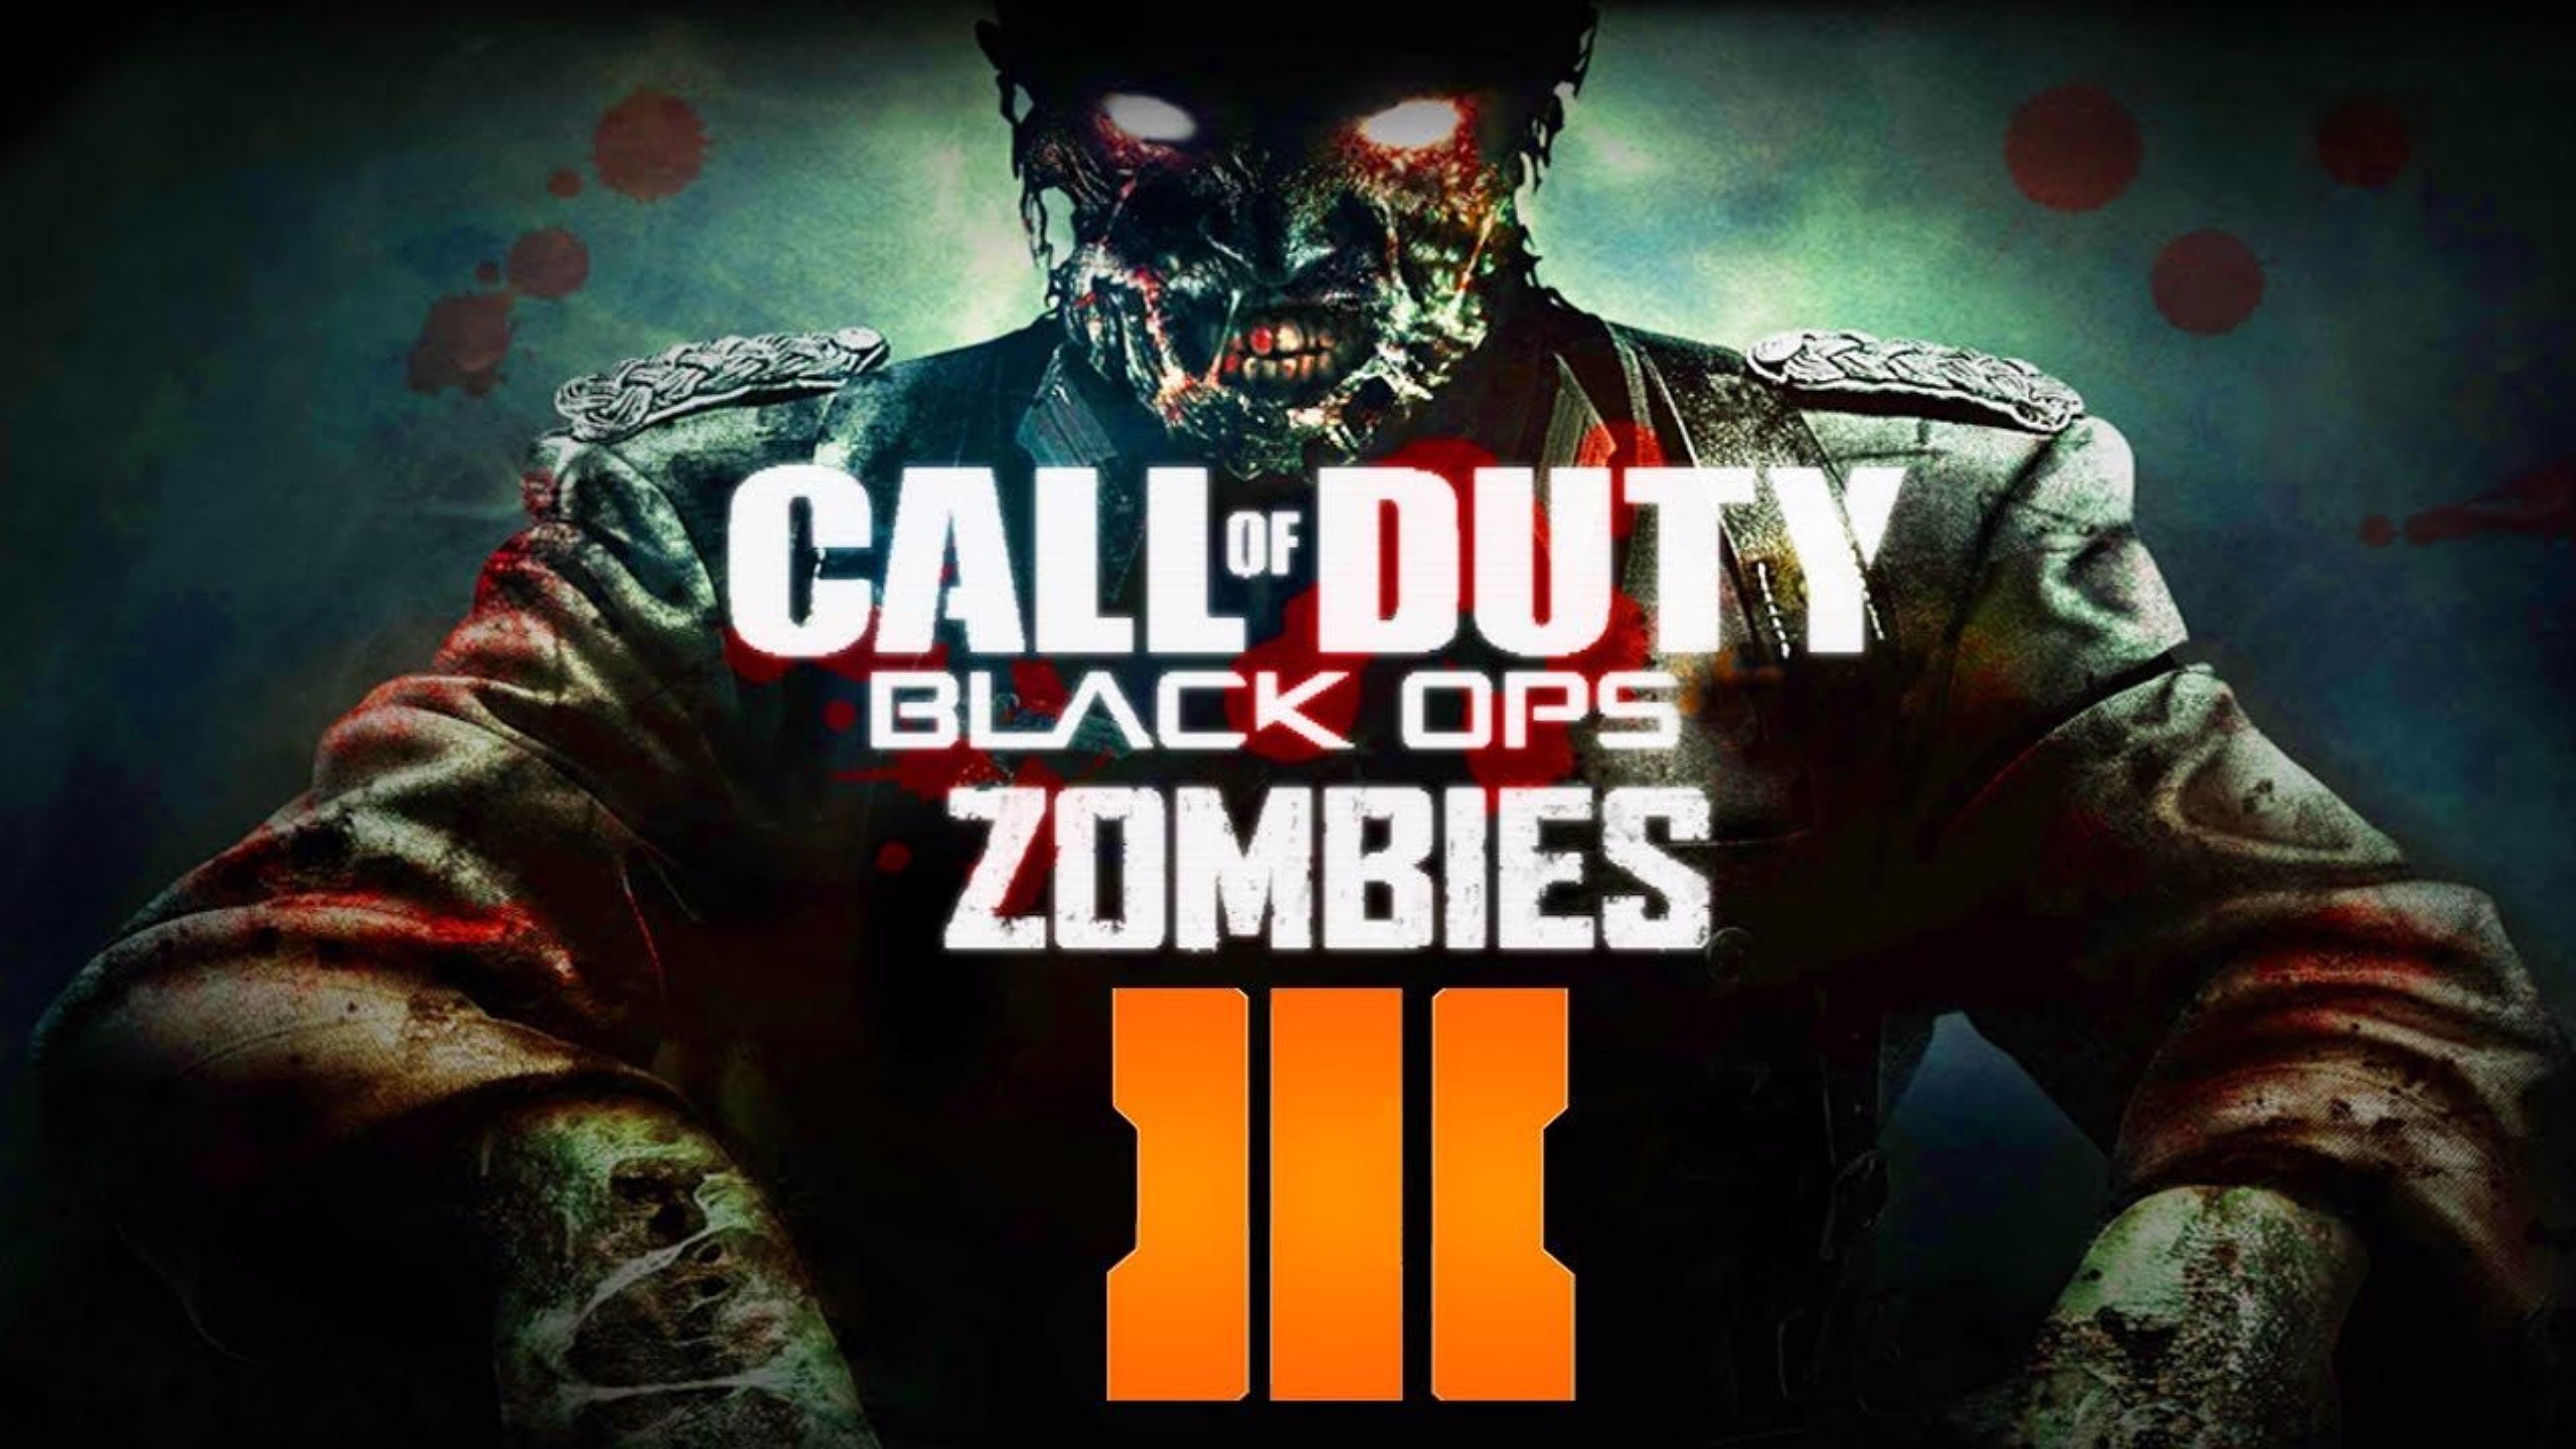 Zombies Wallpaper Black Ops 86 images